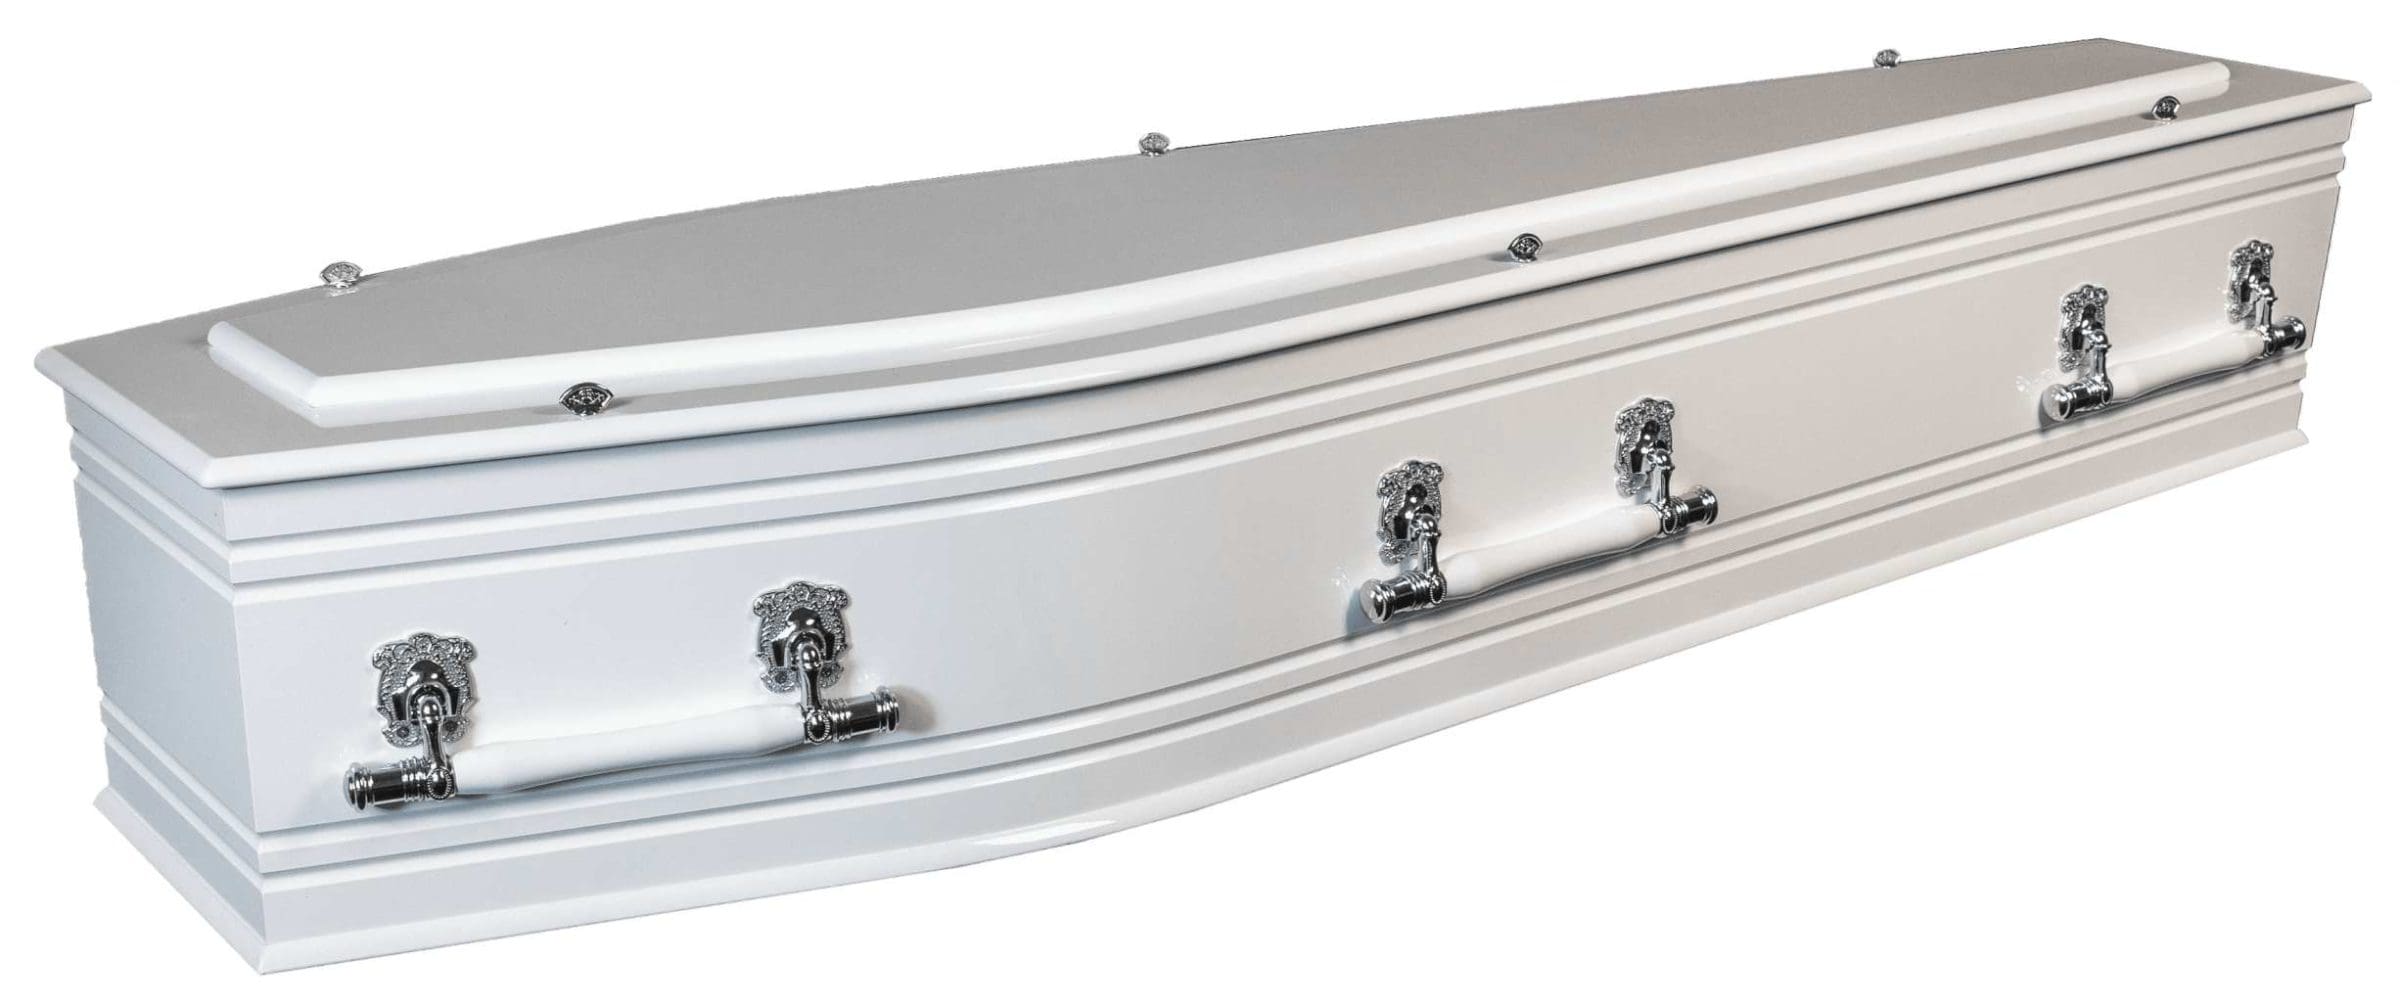 White Gloss Finish Vacy Coffin by Fry Bros Funerals in Maitland